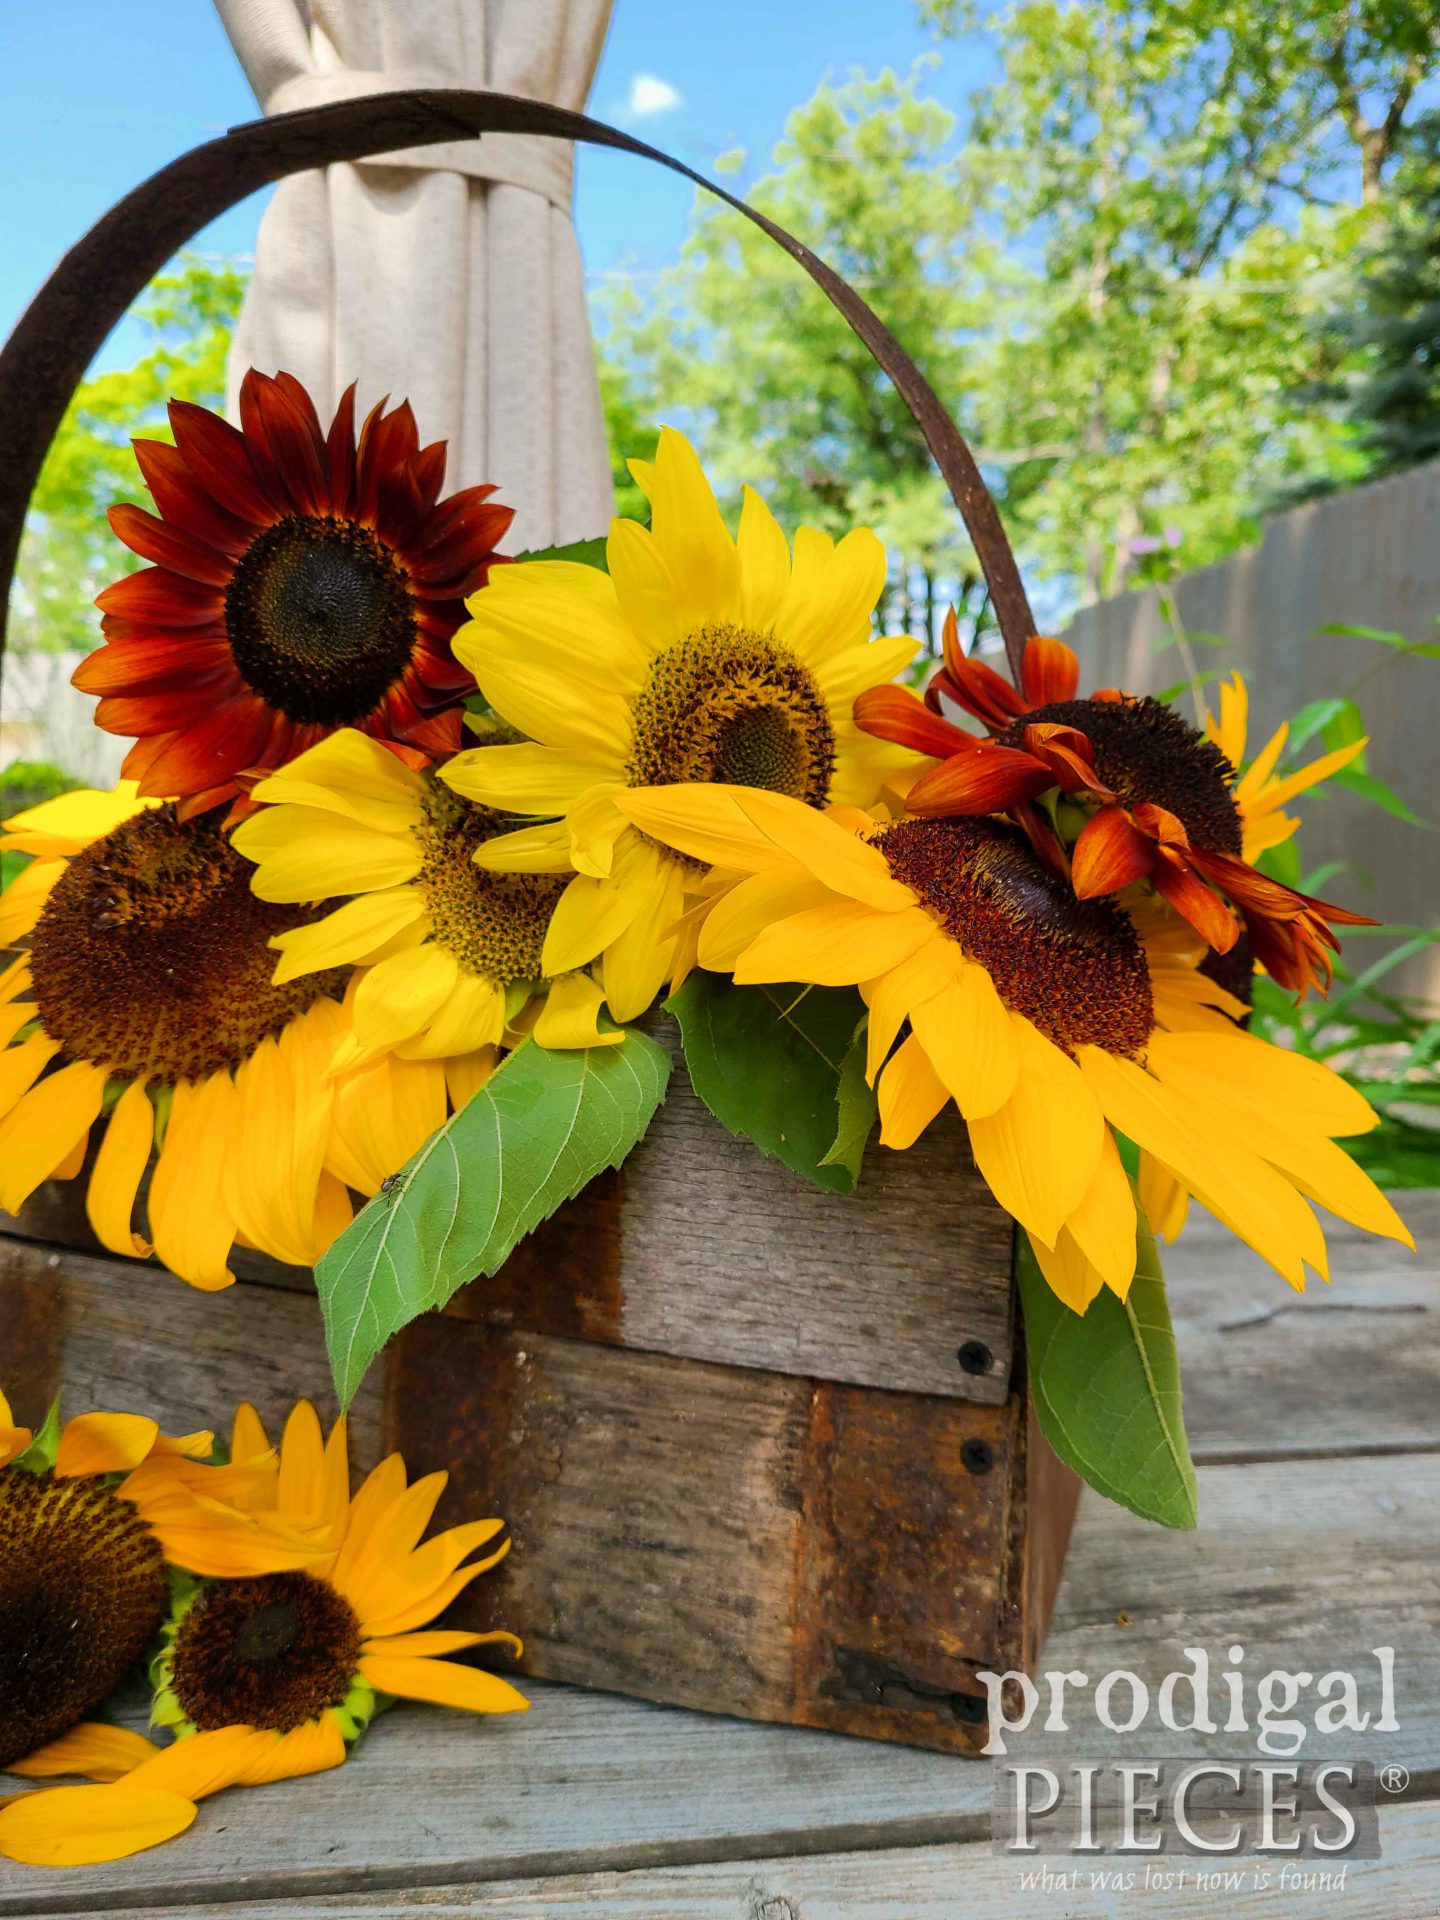 Rustic Farmhouse Sunflower Tote from Upcycled Whiskey Barrel by Larissa of Prodigal Pieces | prodigalpieces.com #prodigalpieces #sunflower #summer #diy #farmhouse